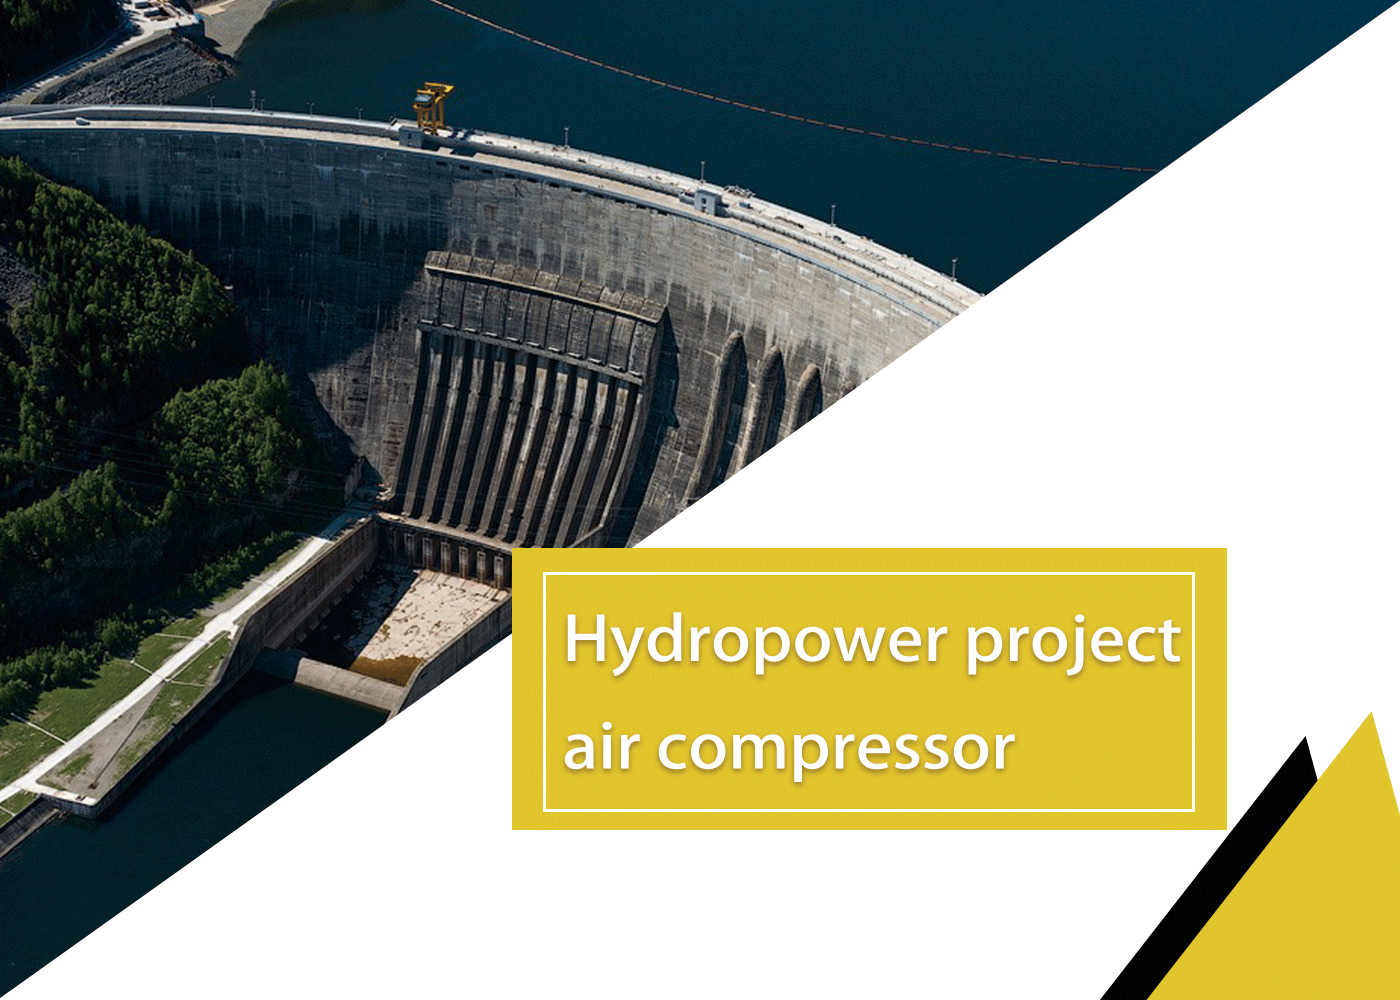 Hydropower project air compressor